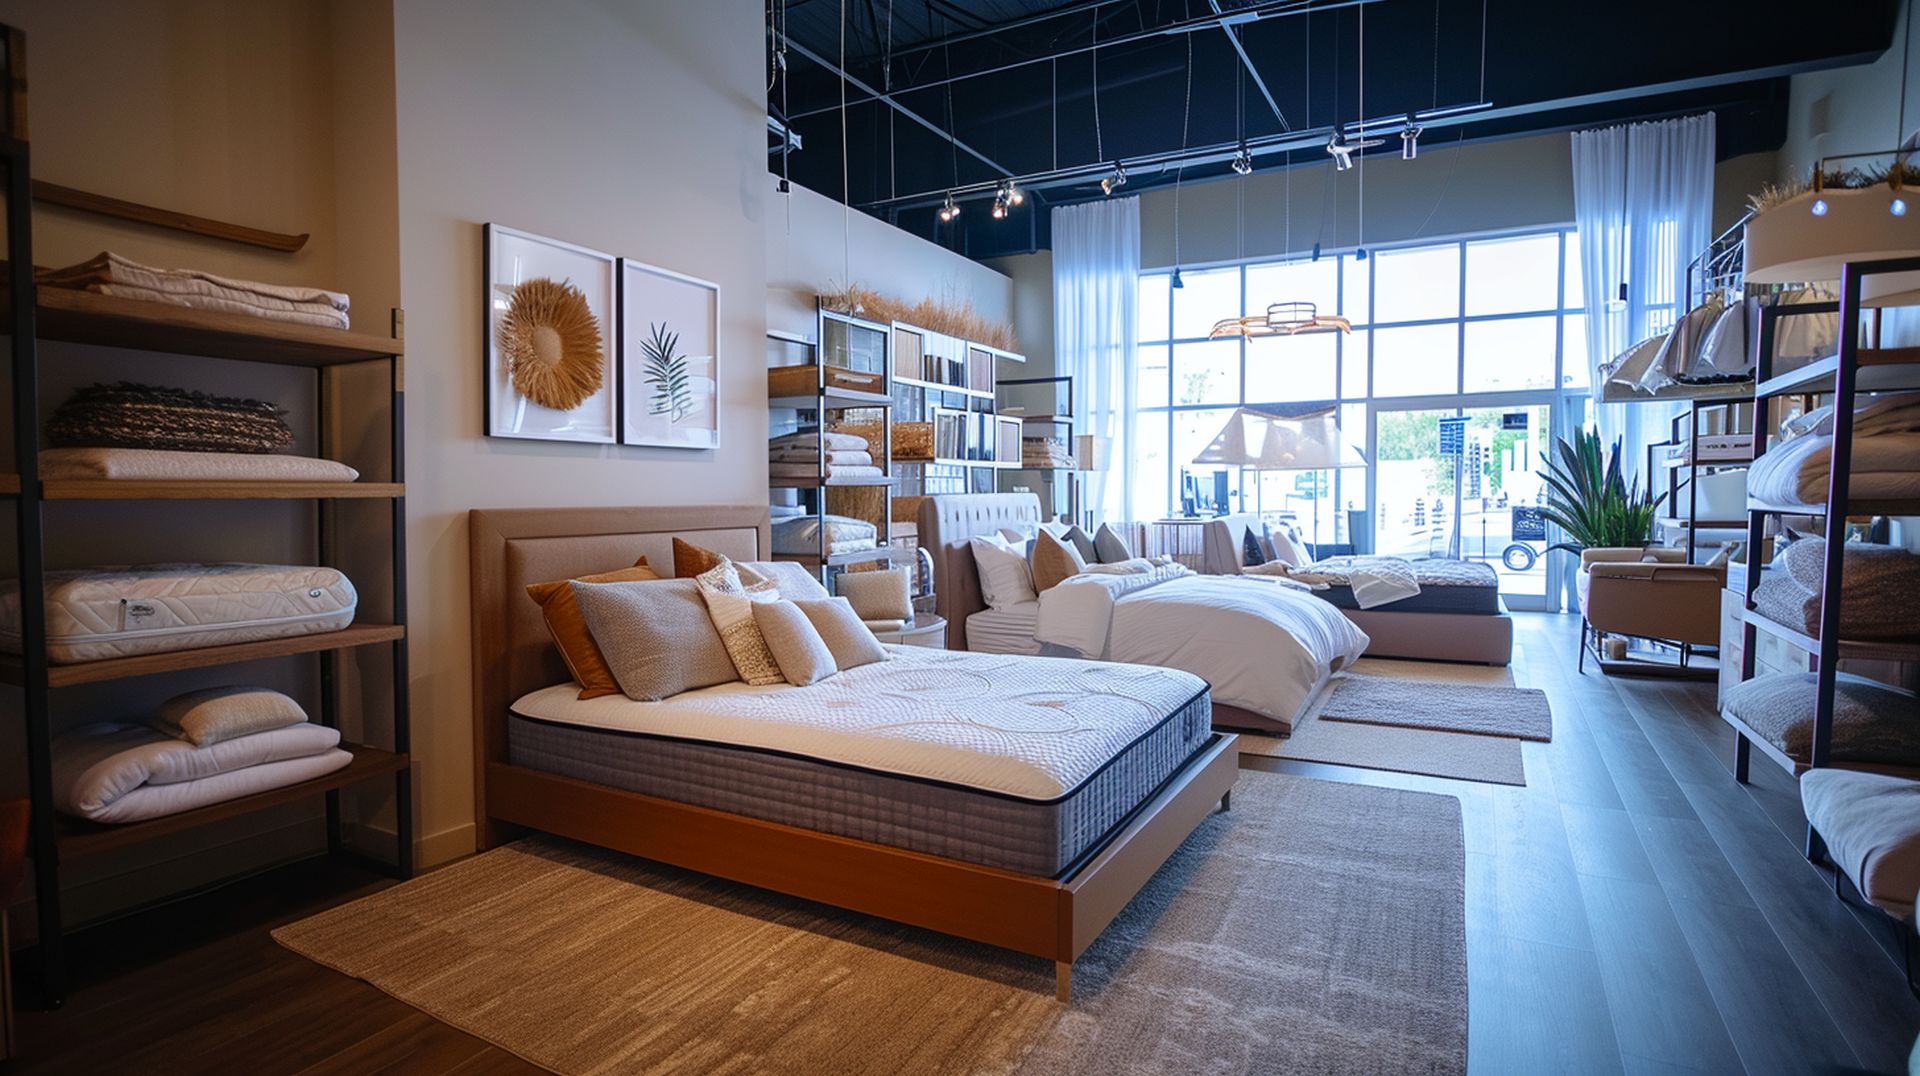 Types of mattresses at mattress dealers in Provo, UT